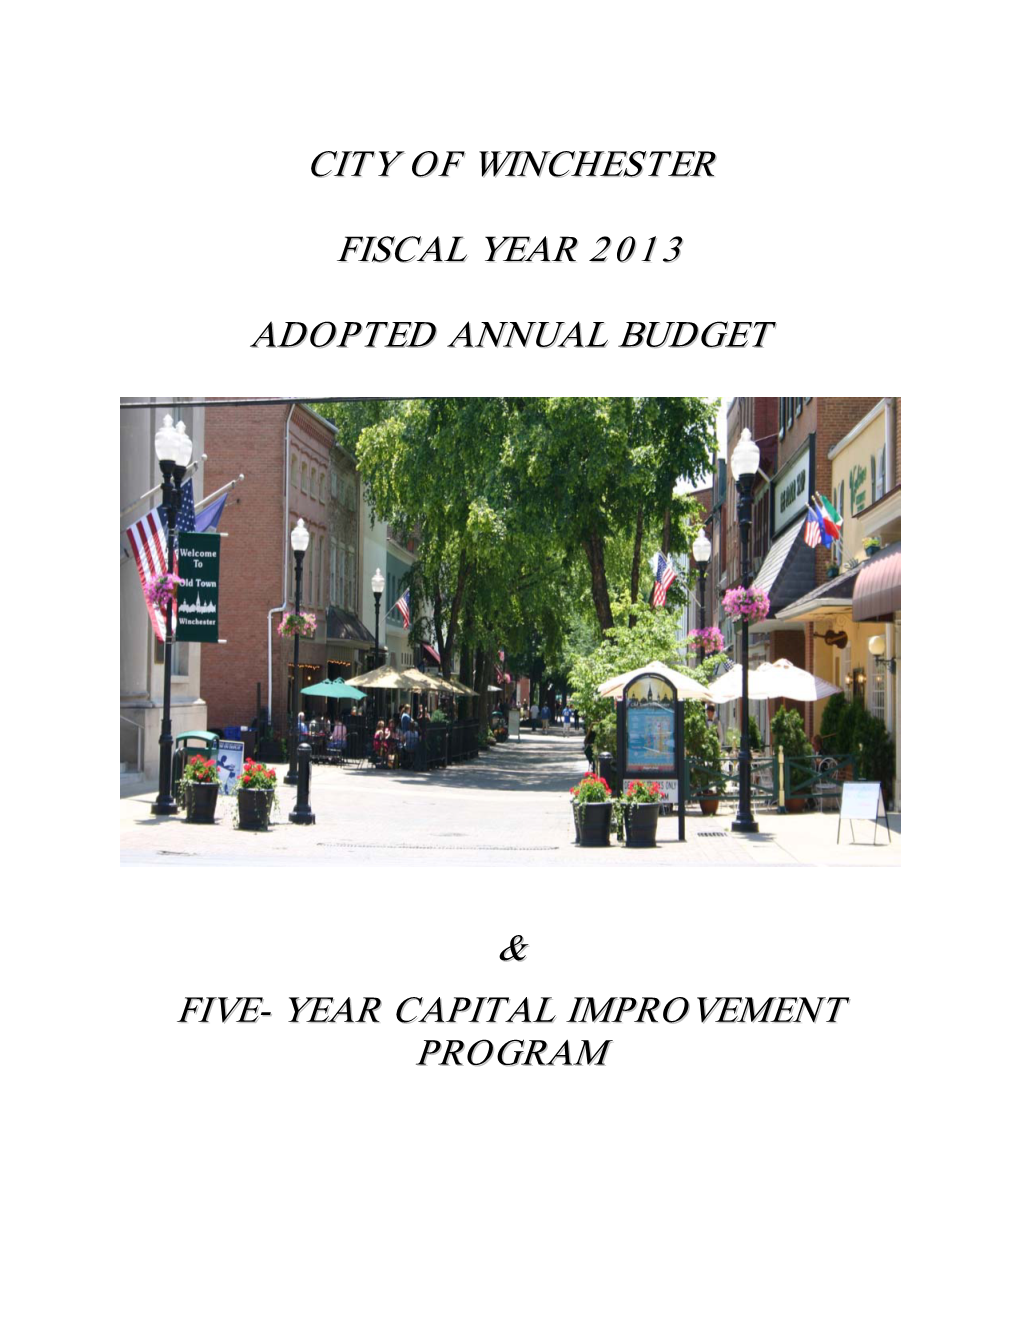 City of Winchester Fiscal Year 2013 Adopted Annual